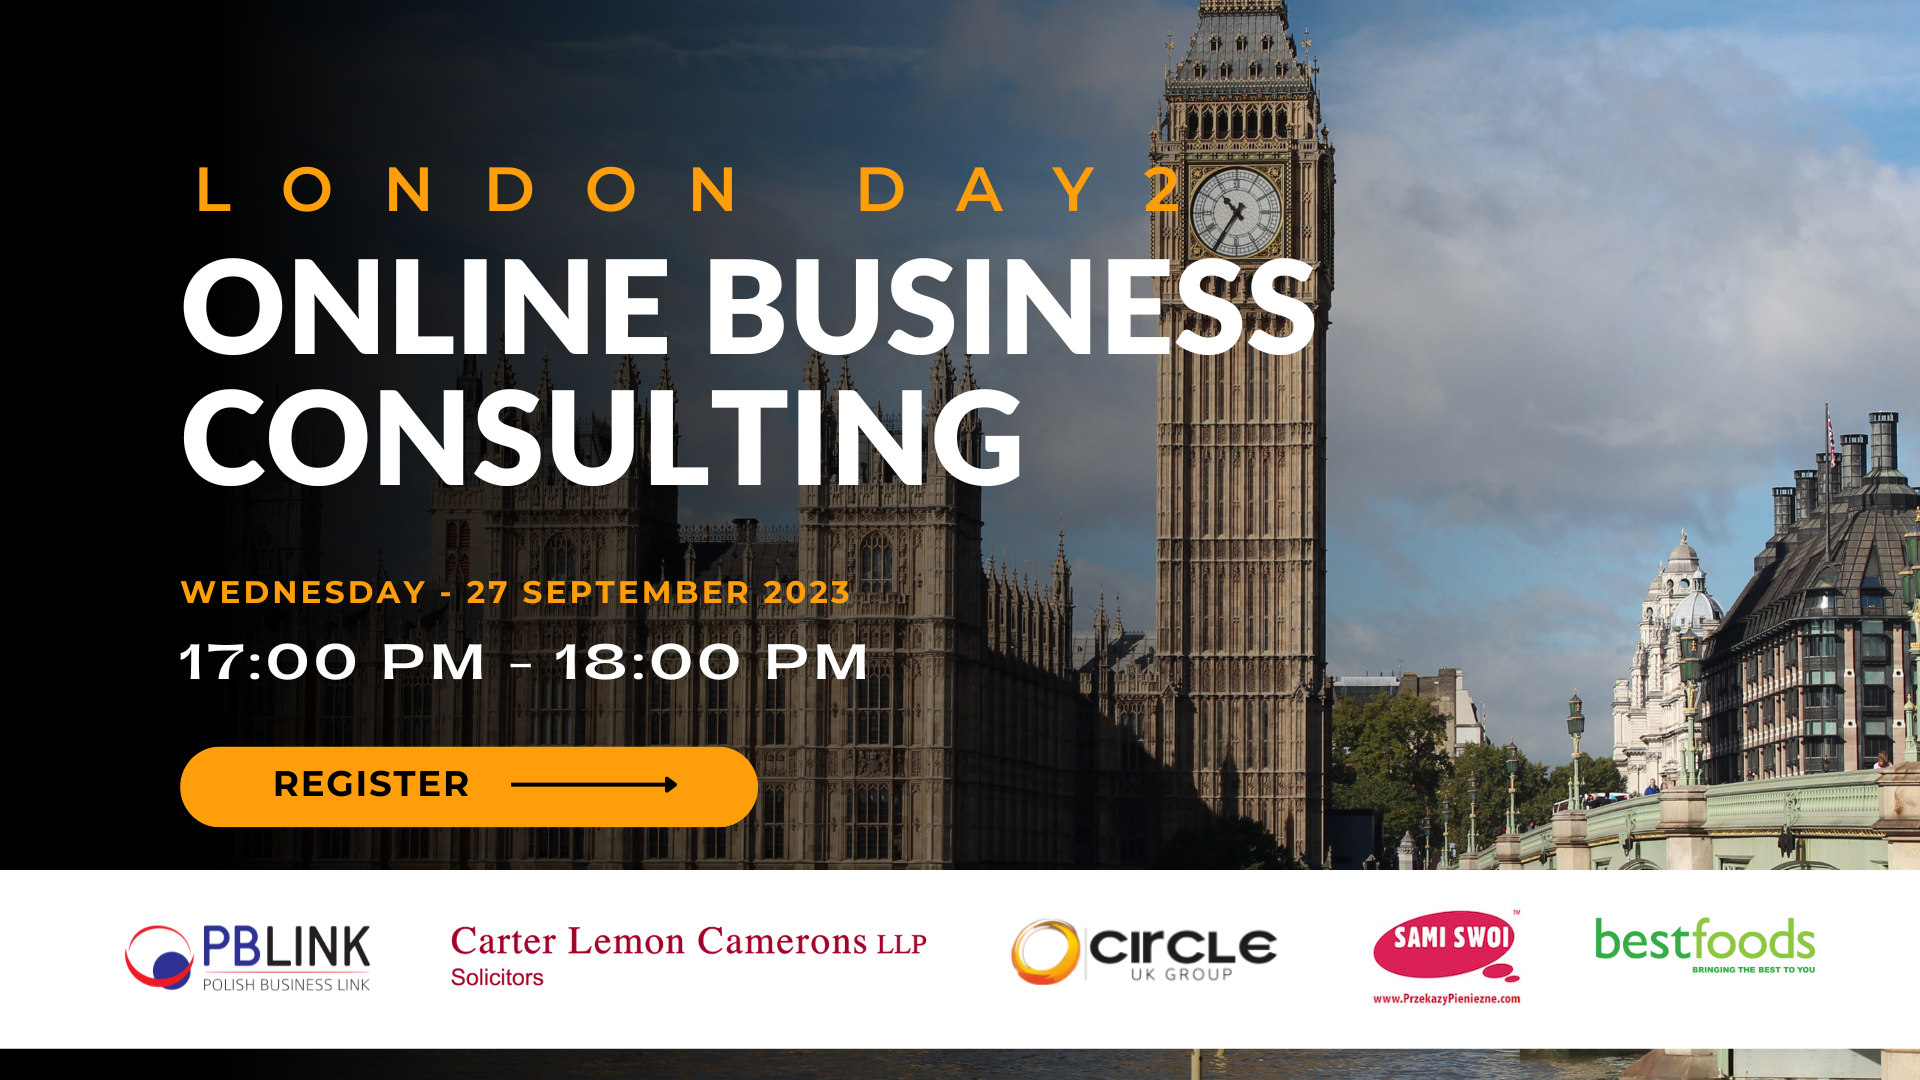 Polish Business Link Online business Consulting London Day 2